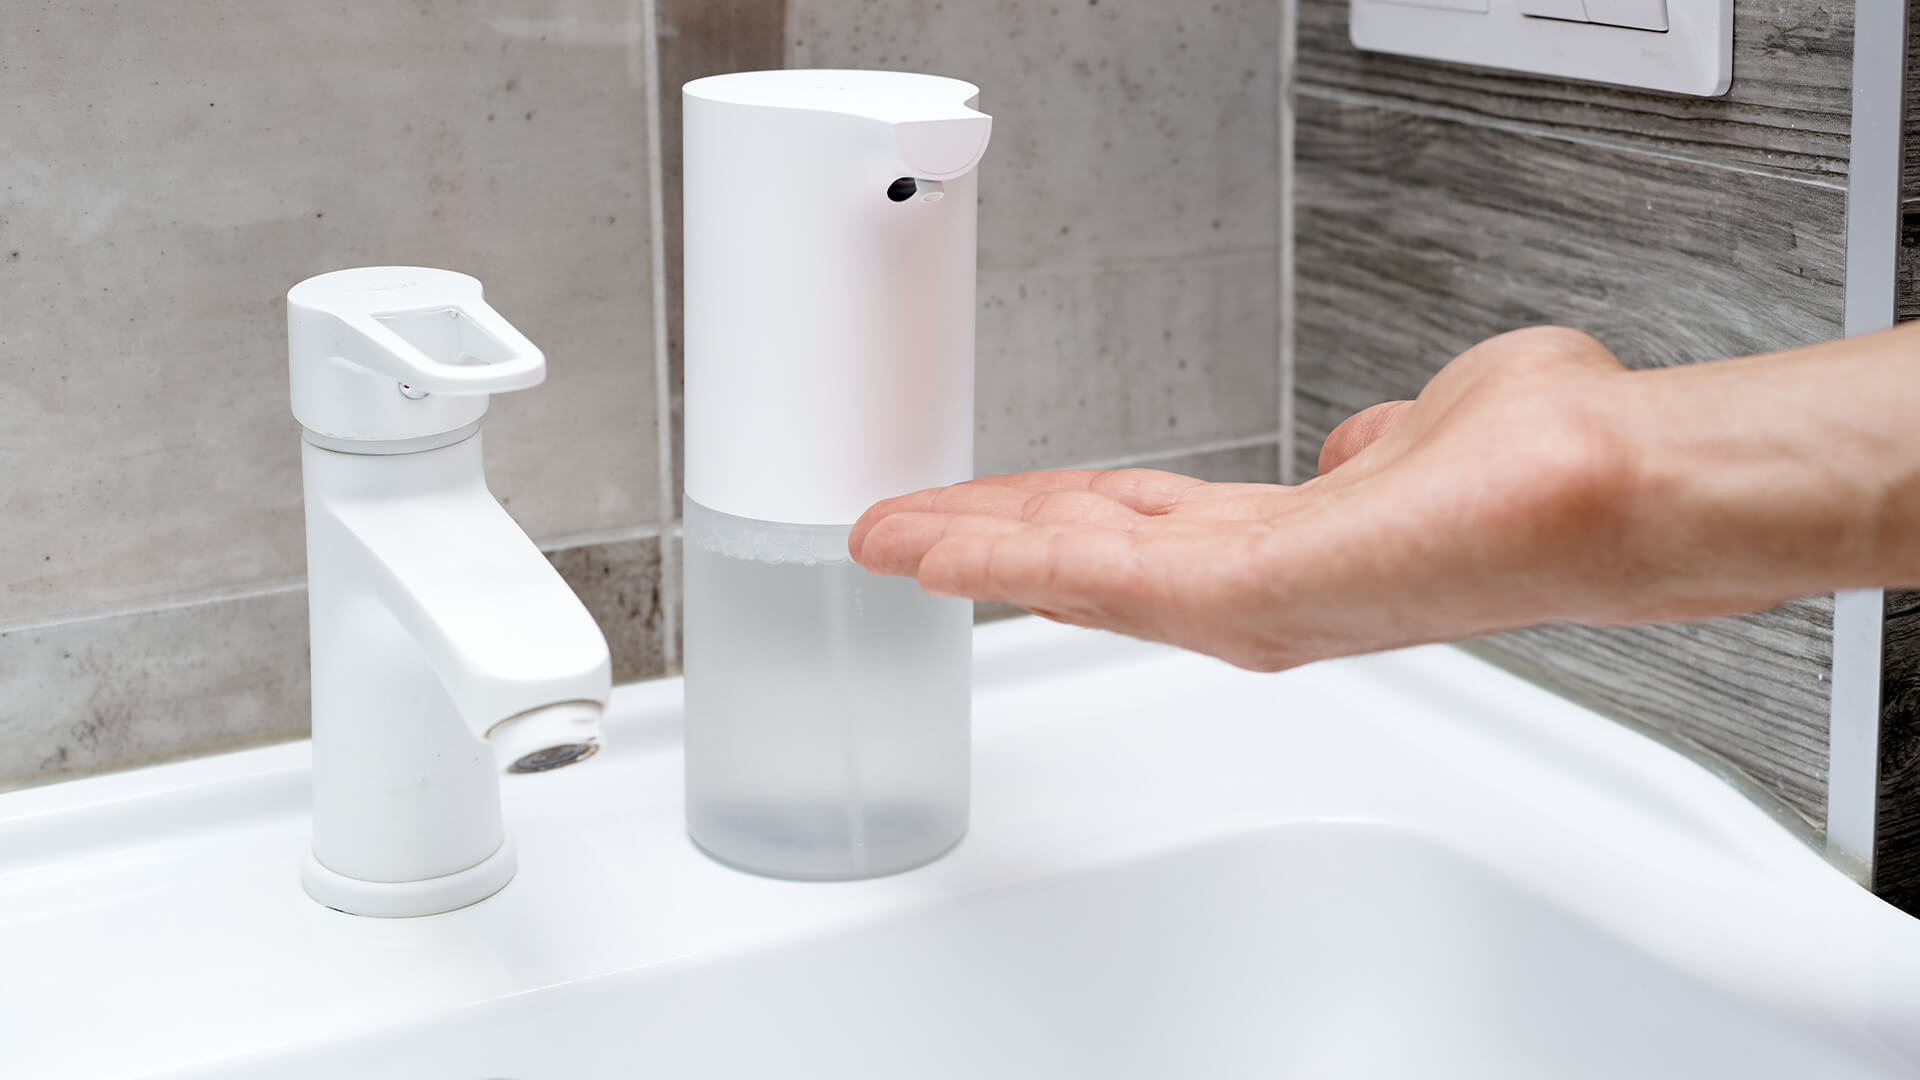 Man using contactless soap dispenser at home